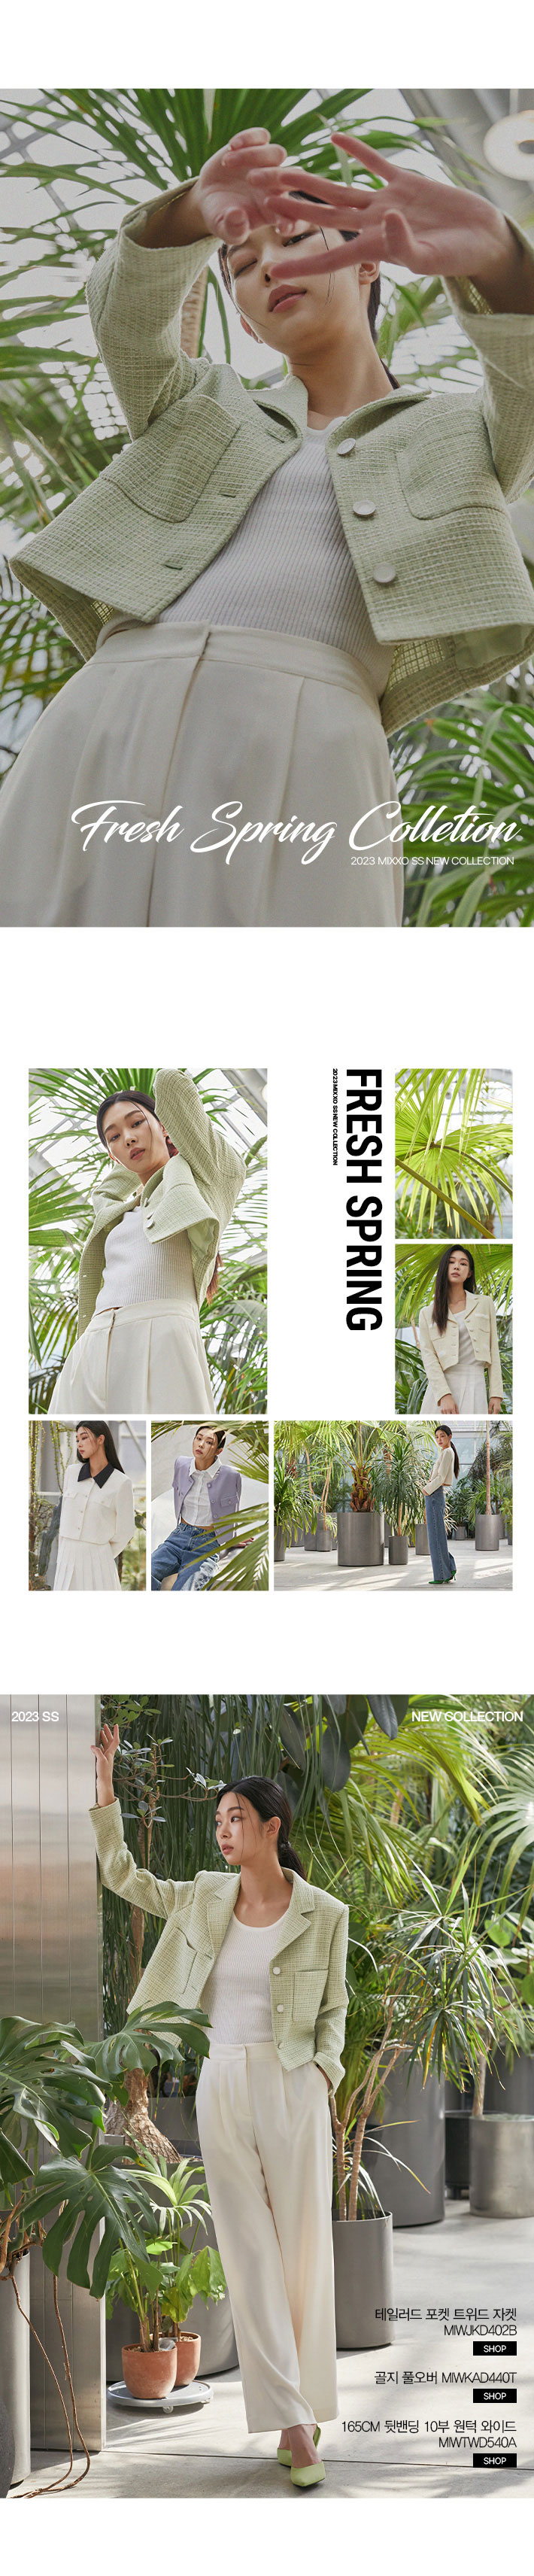 FRESH SPRING COLLECTION - 미쏘